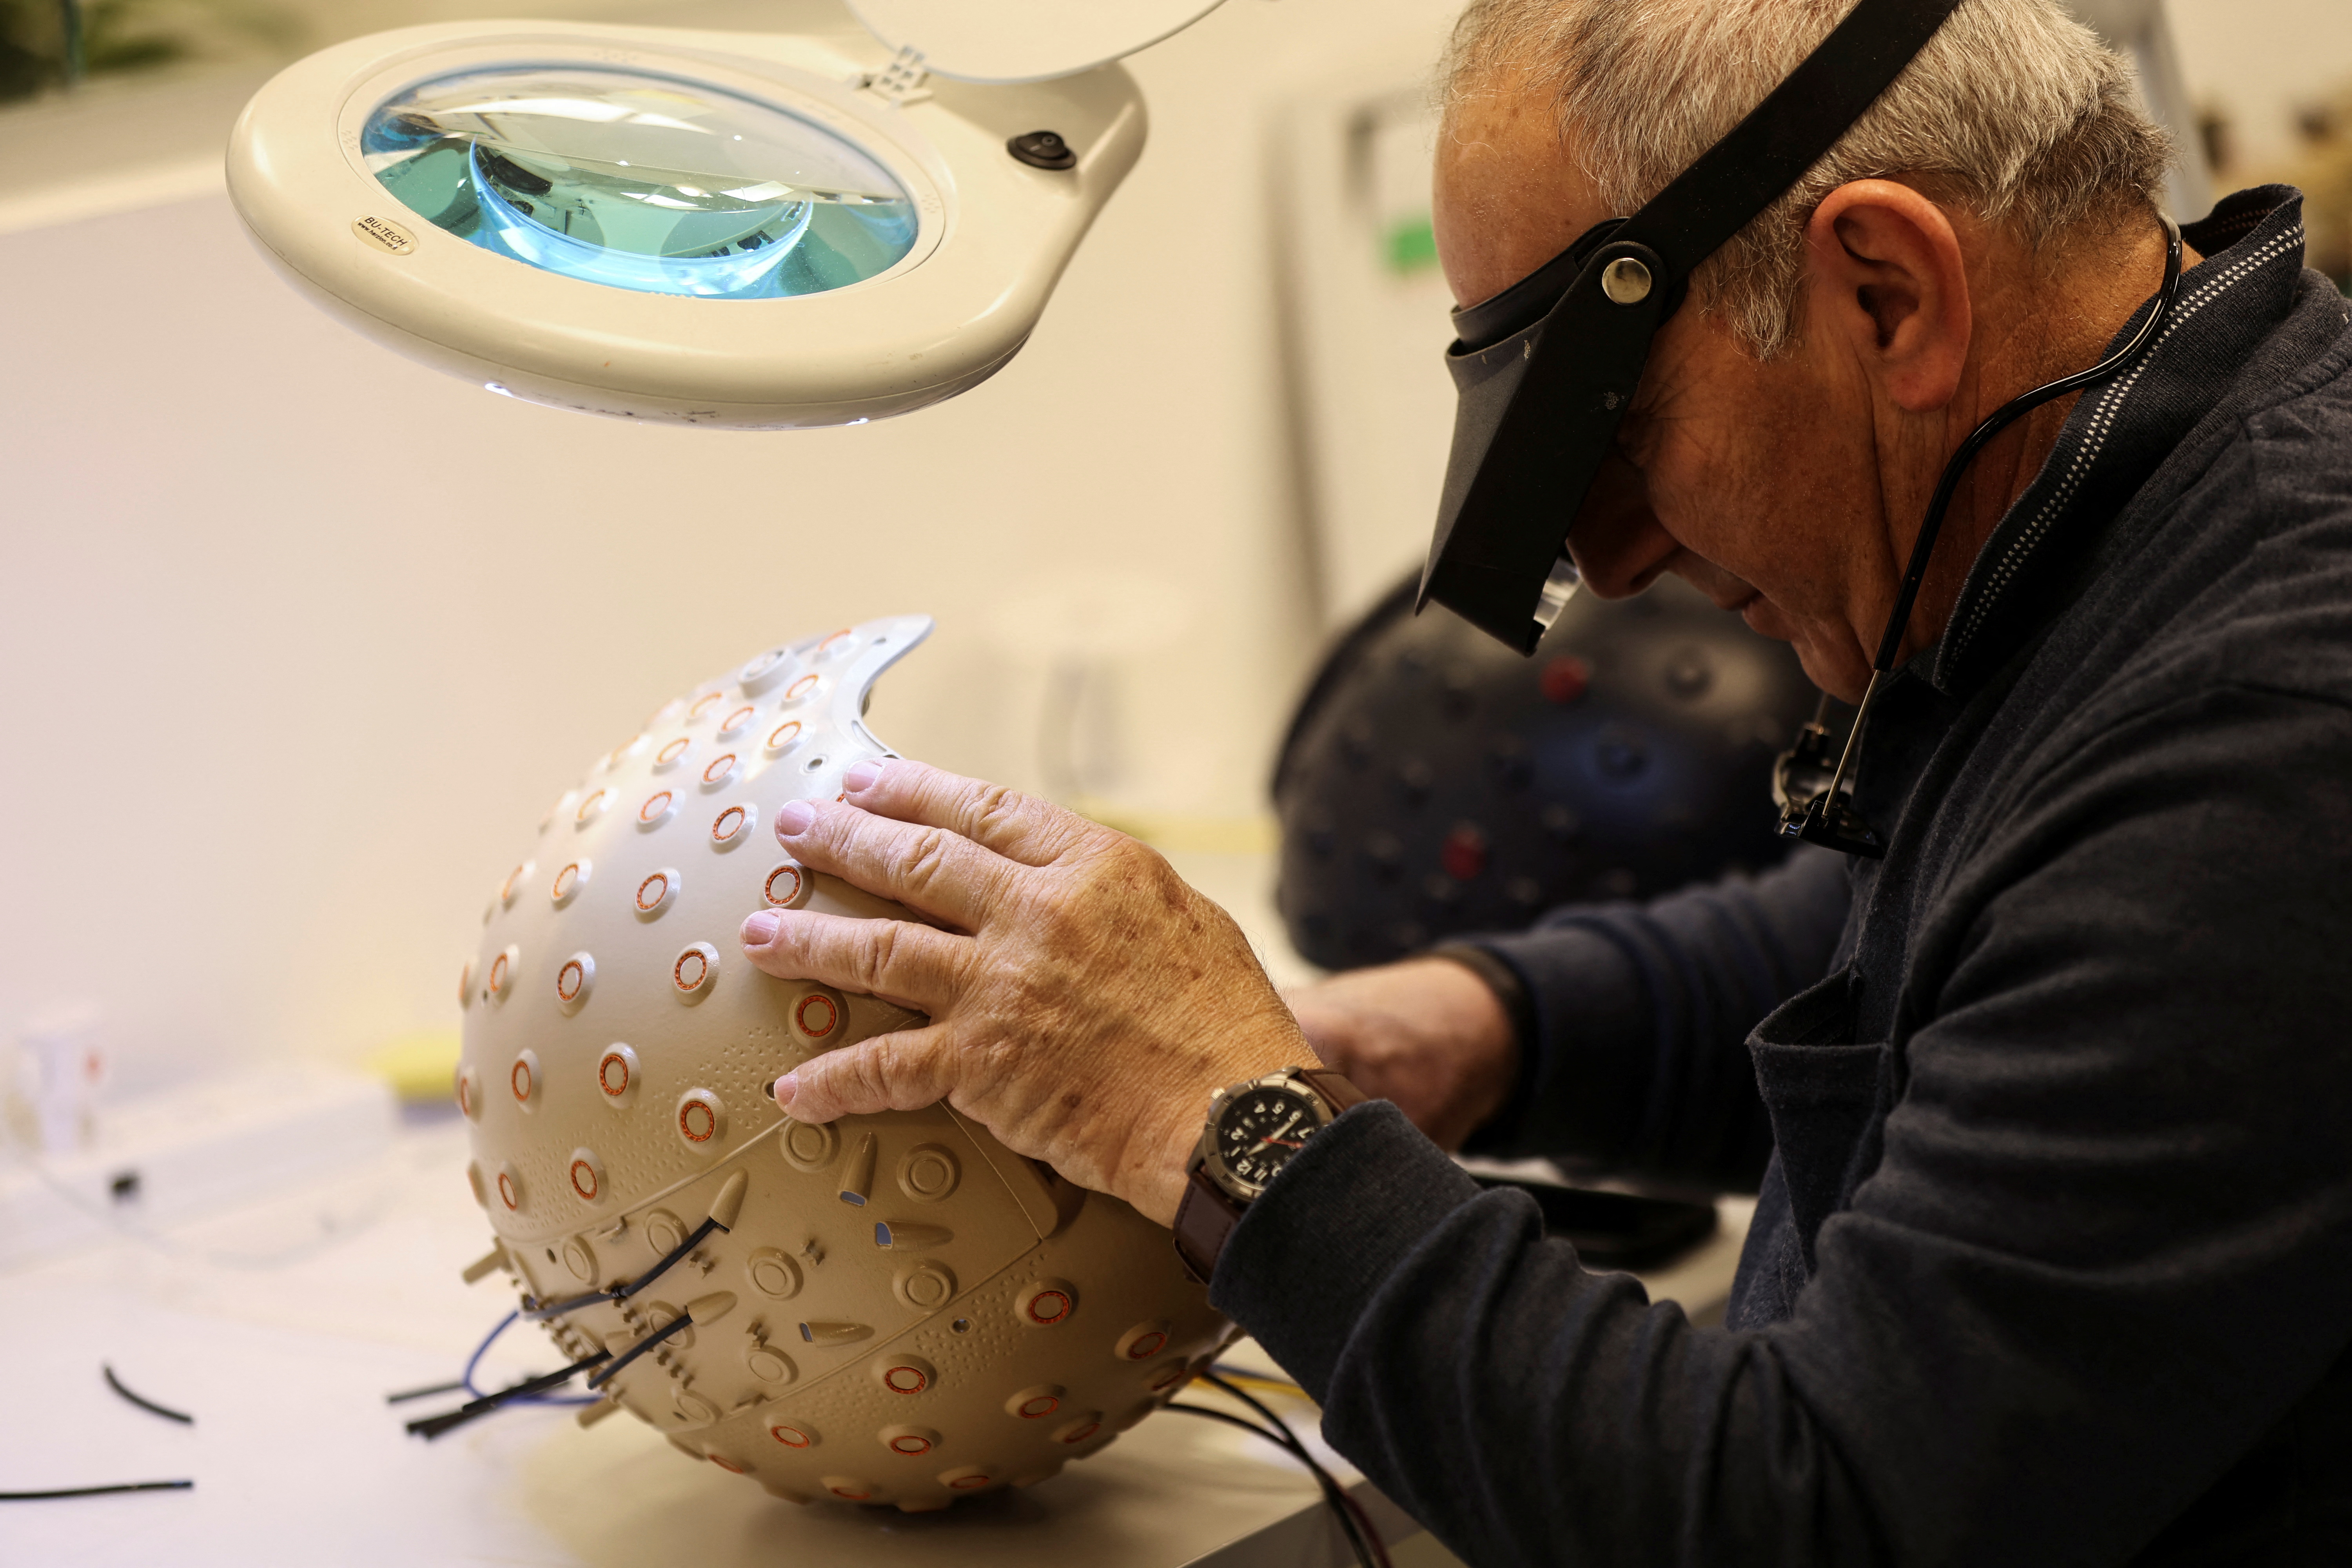 A worker at the Israeli startup Brain.Space builds an EEG enabled helmet, due to be used in an experiment on the impact of a microgravity environment on the brain activity, in Tel Aviv